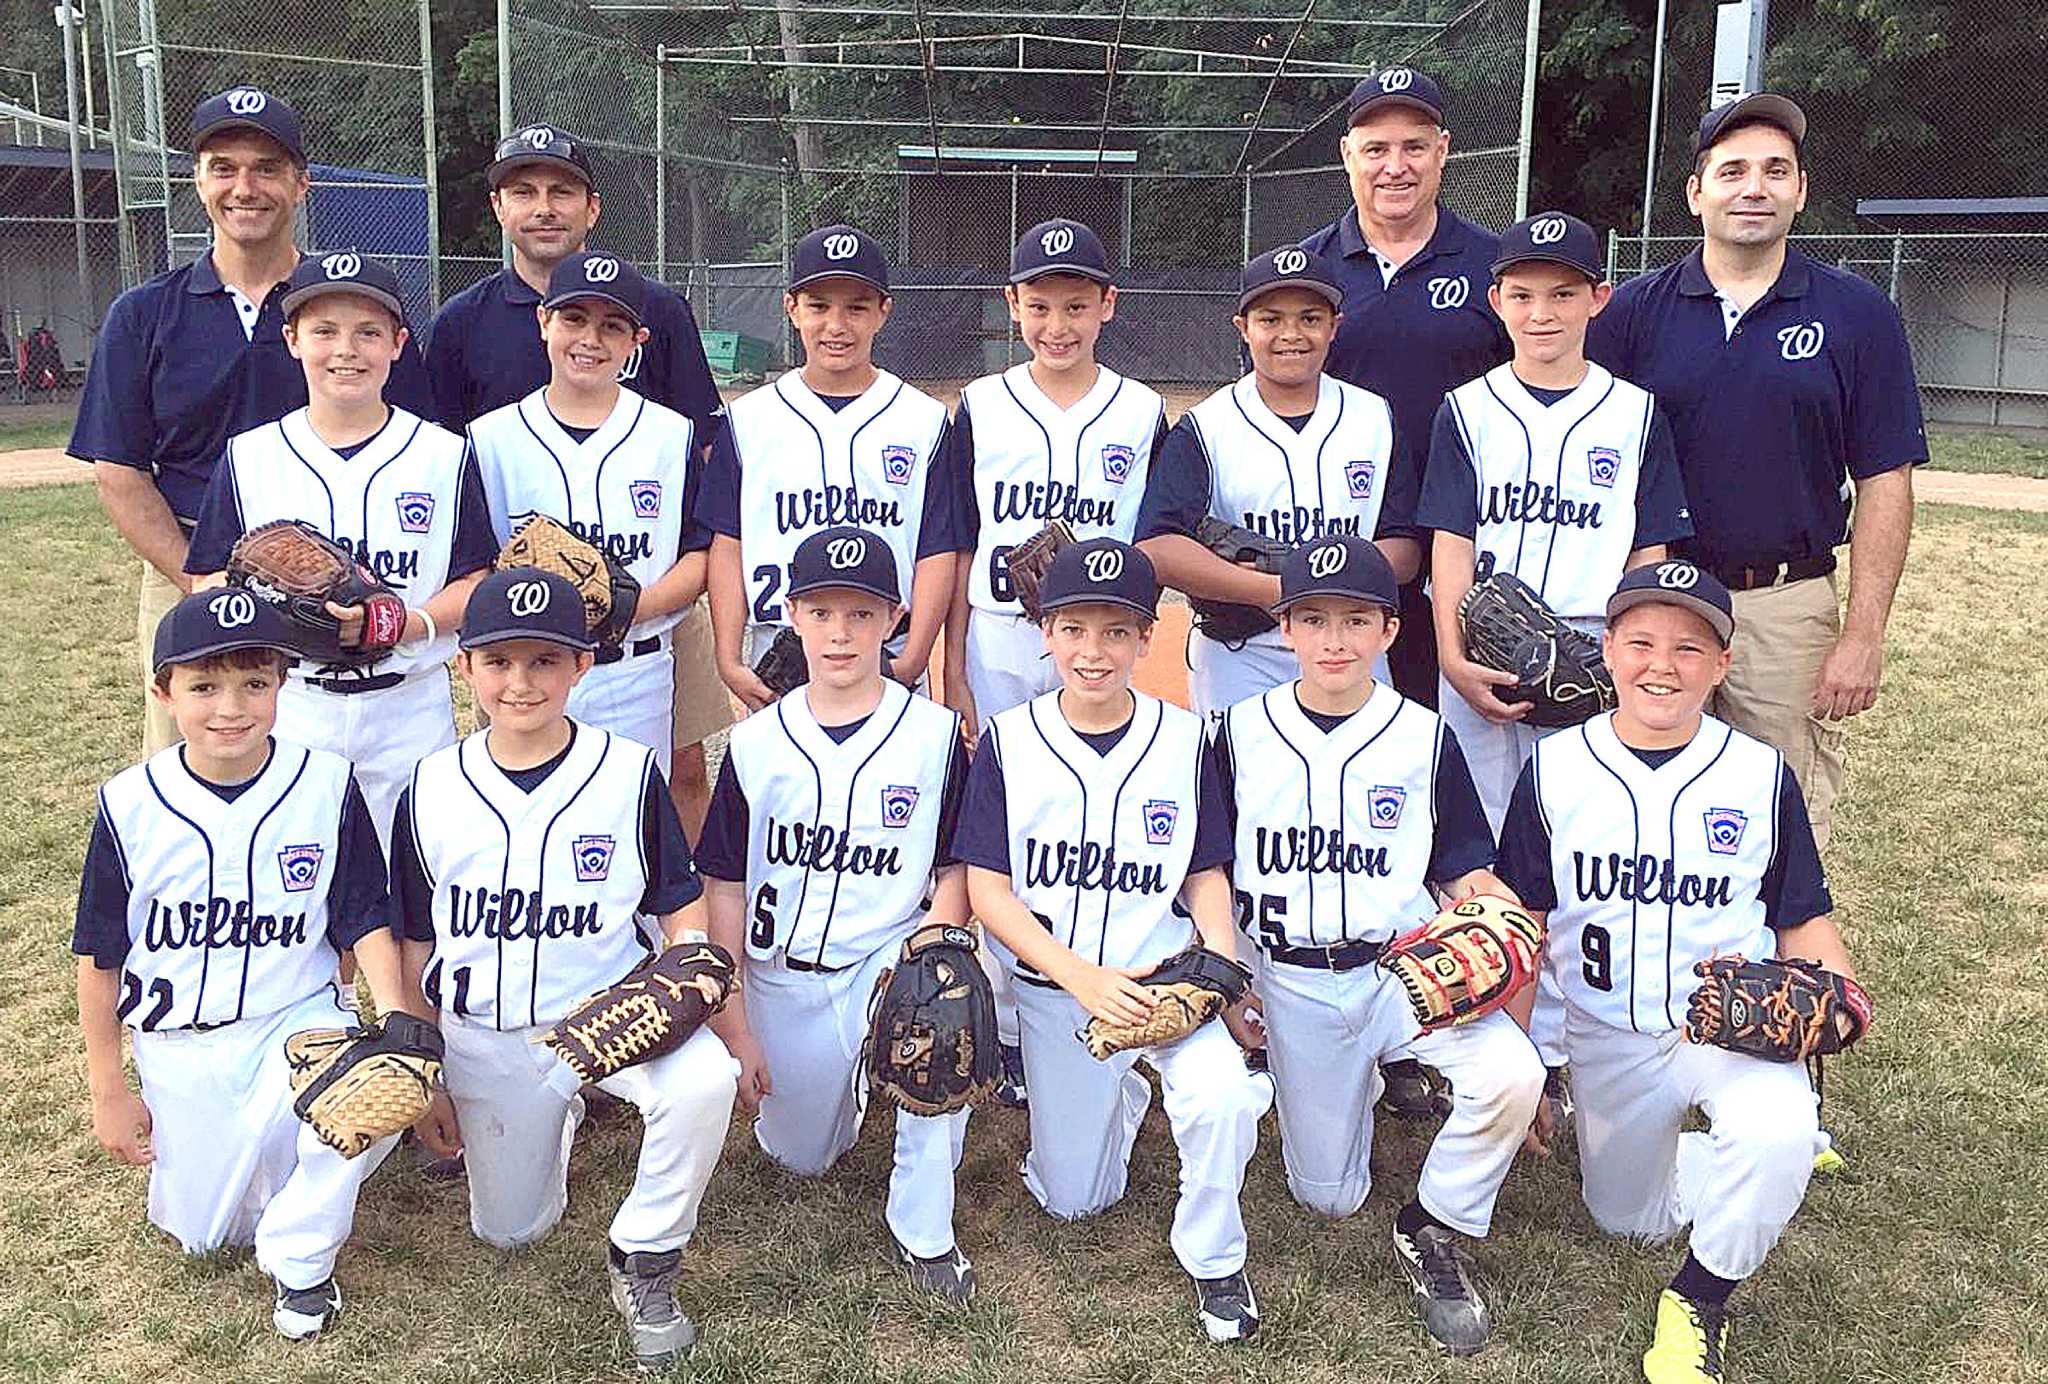 Wilton hits a home run for Little League Day